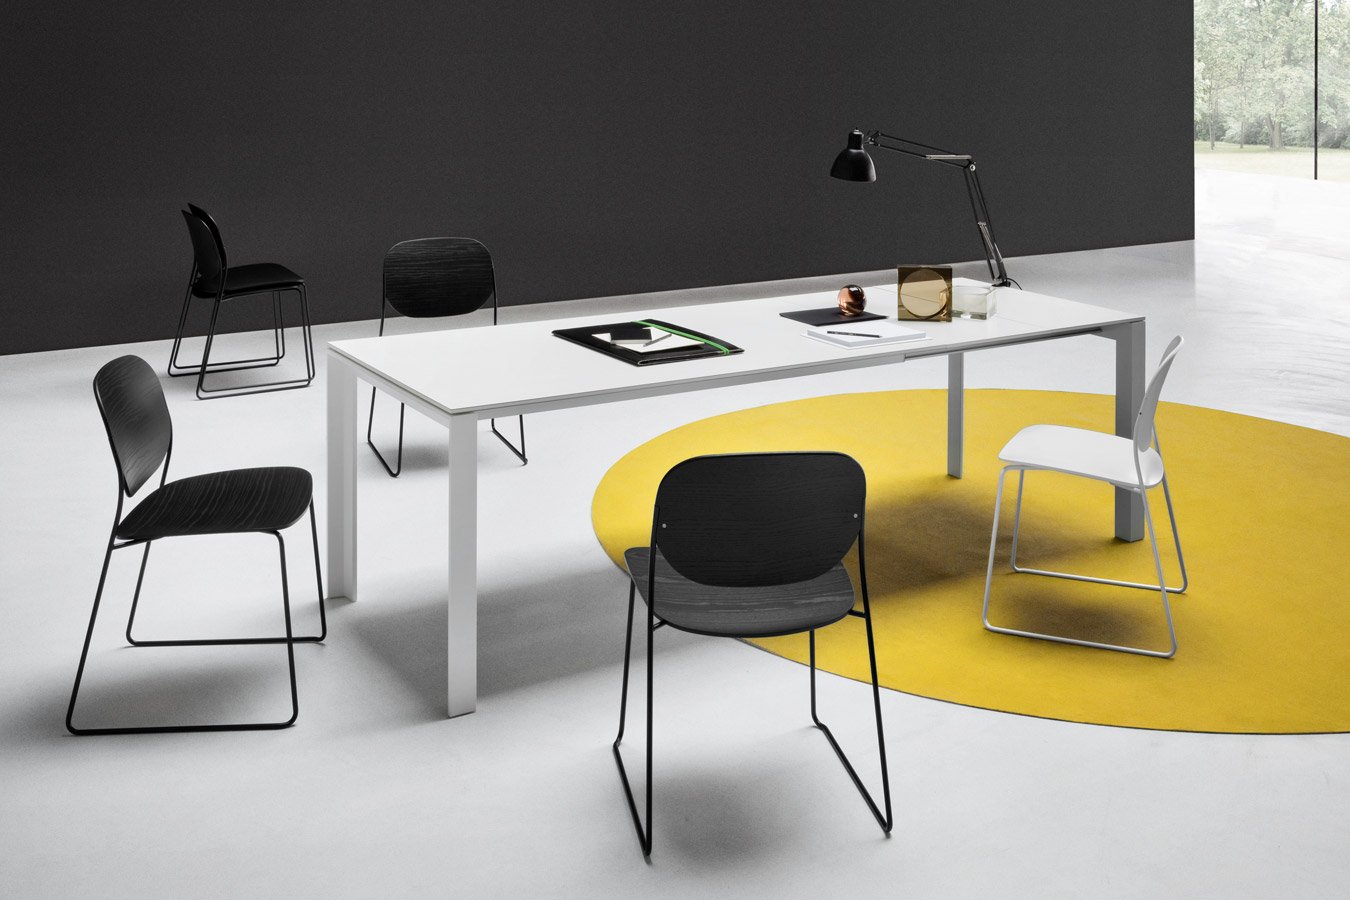 Olo Chair from lapalma, designed by Francesco Rota